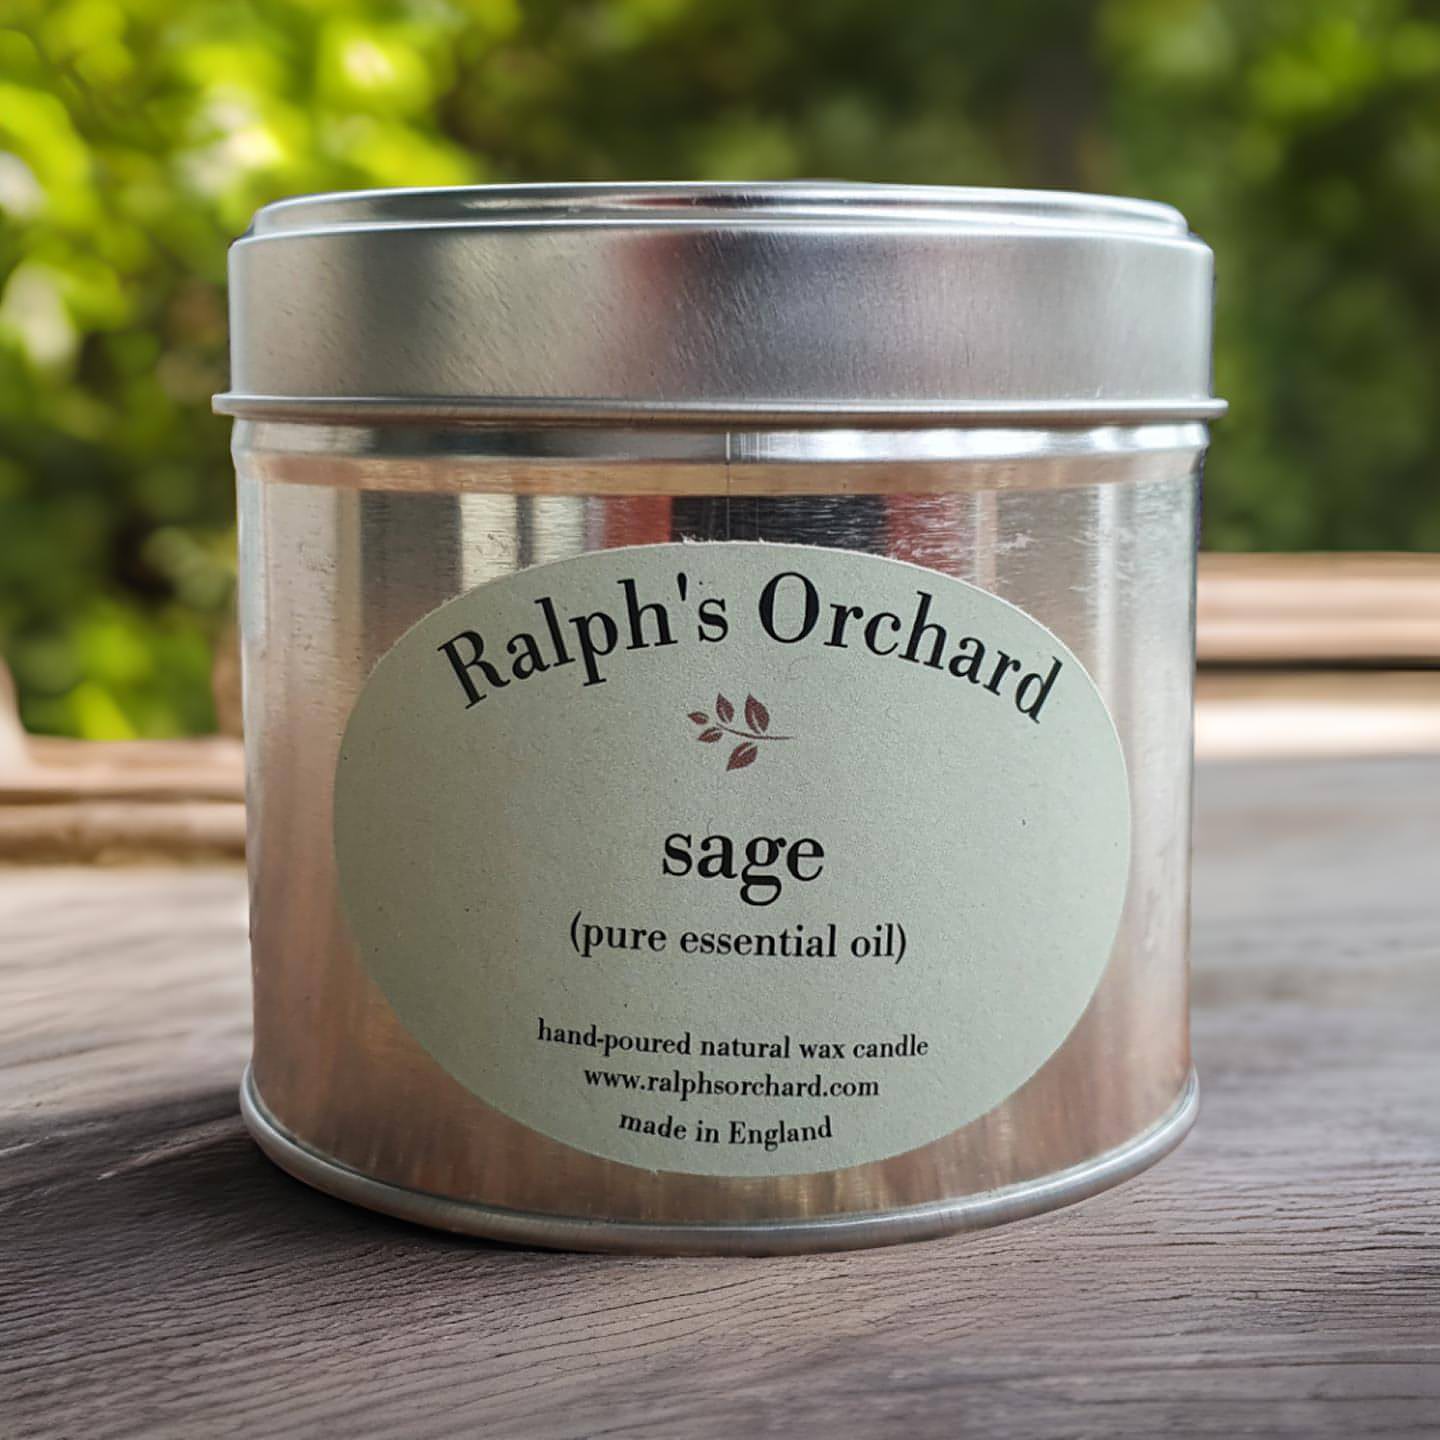 sage essential oil scented candle